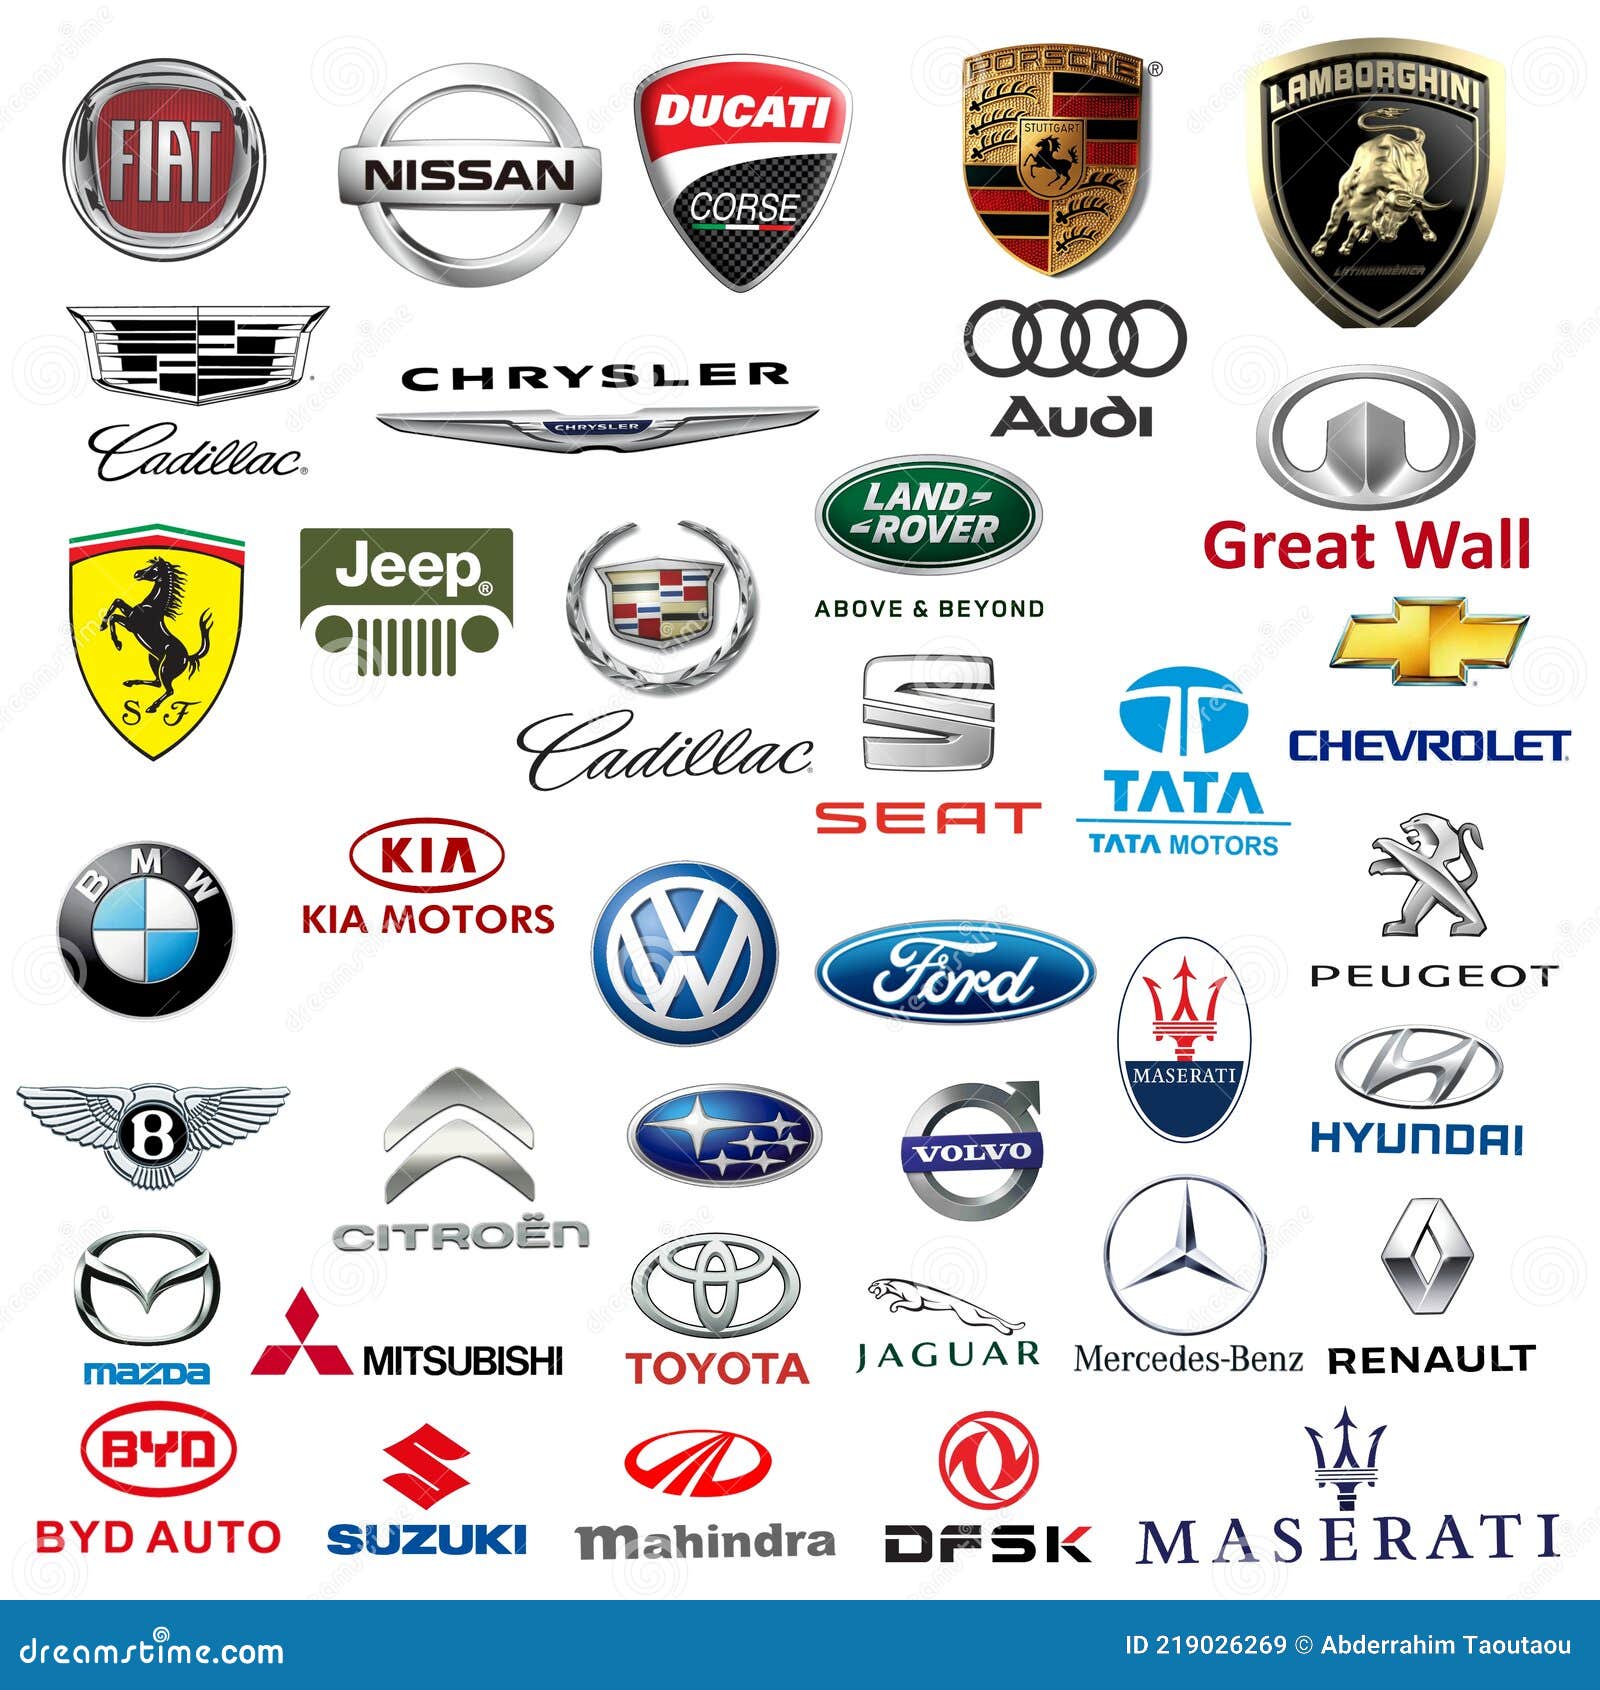 The Most Famous European, Asian And American Car Brands Have 38 Logos ...